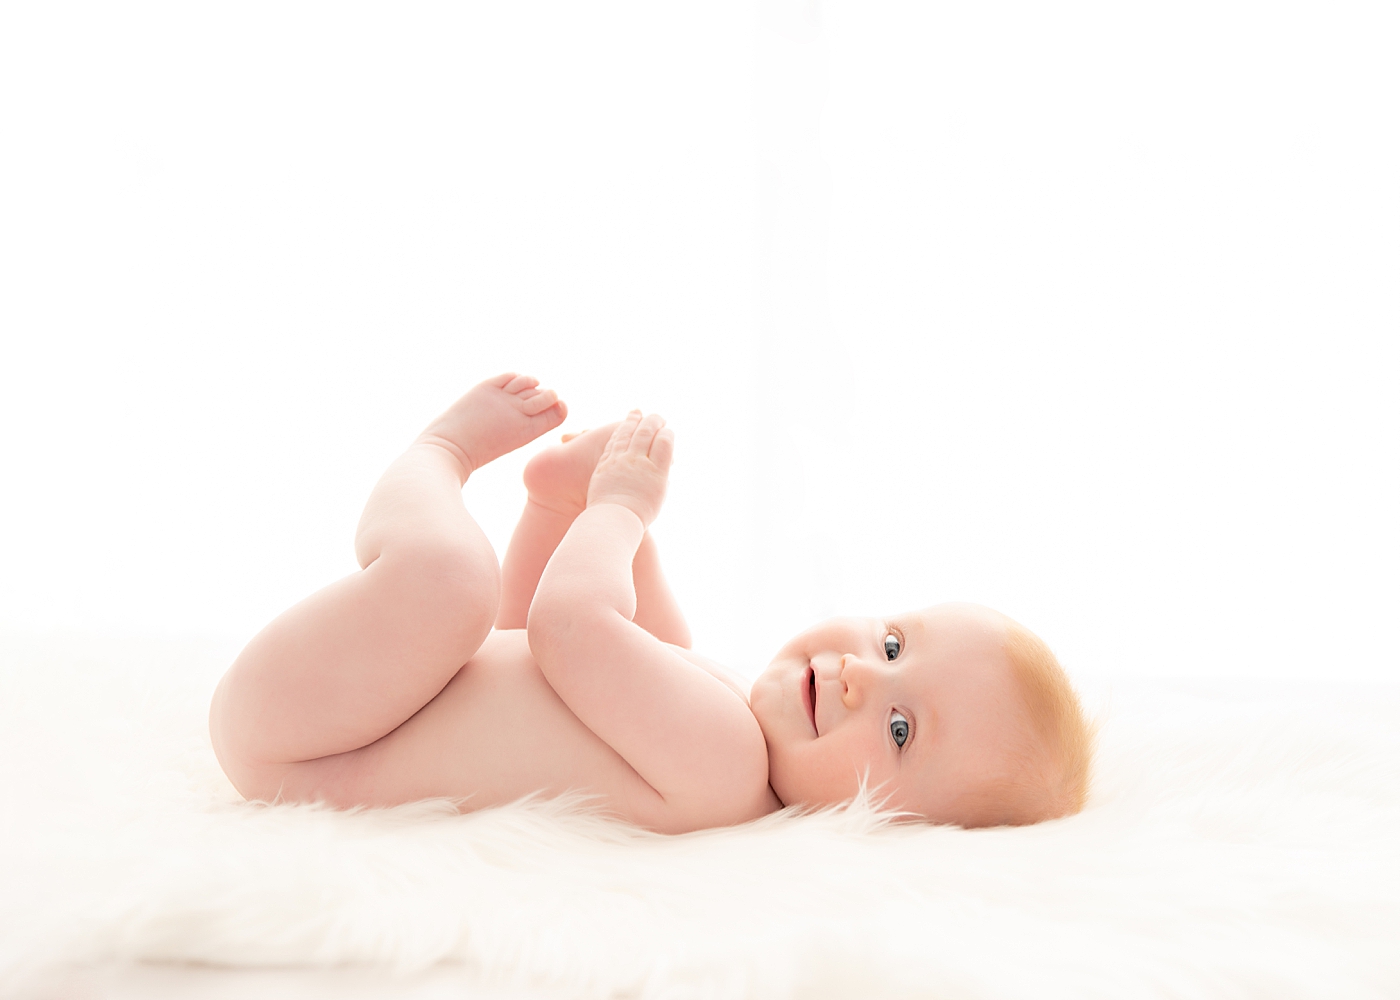 Baby boy laying on his back playing with his feet. Photo by Chagrin Falls baby photographer, Rachel Brookes Photography.